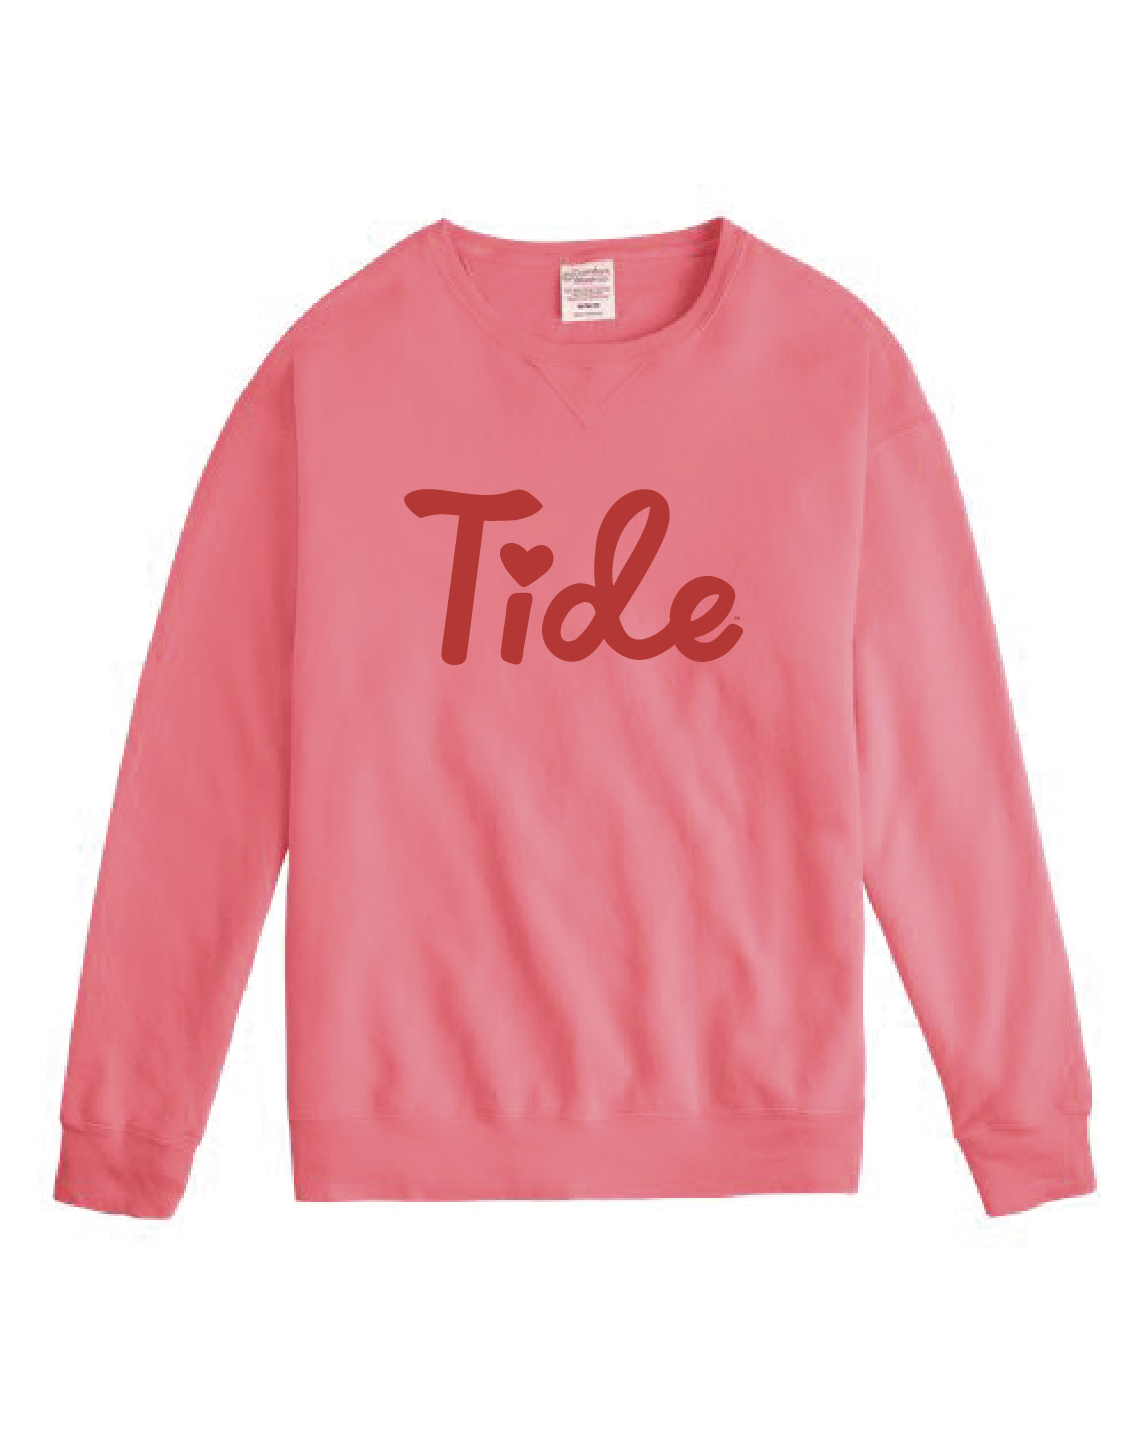 cross my Ts and heart my Is Tide crewneck